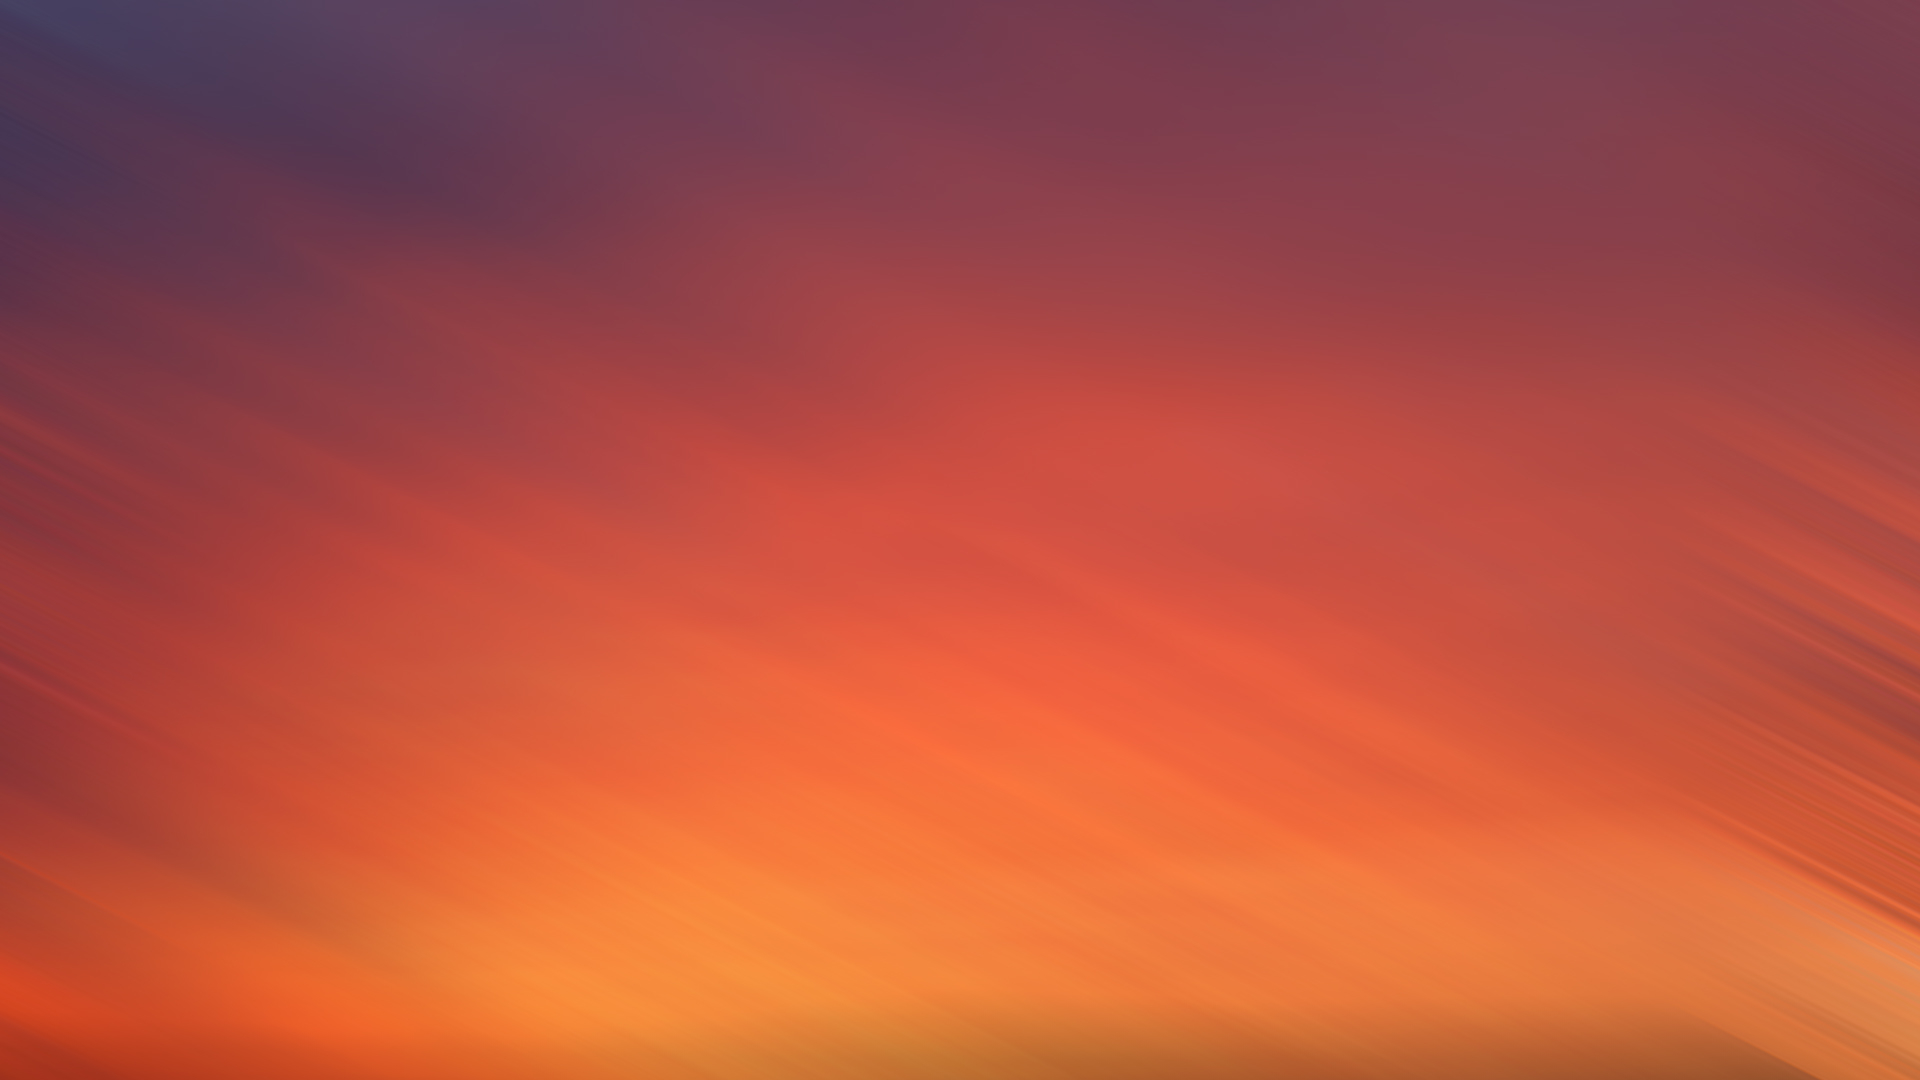 blur wallpaper,sky,afterglow,red,orange,red sky at morning